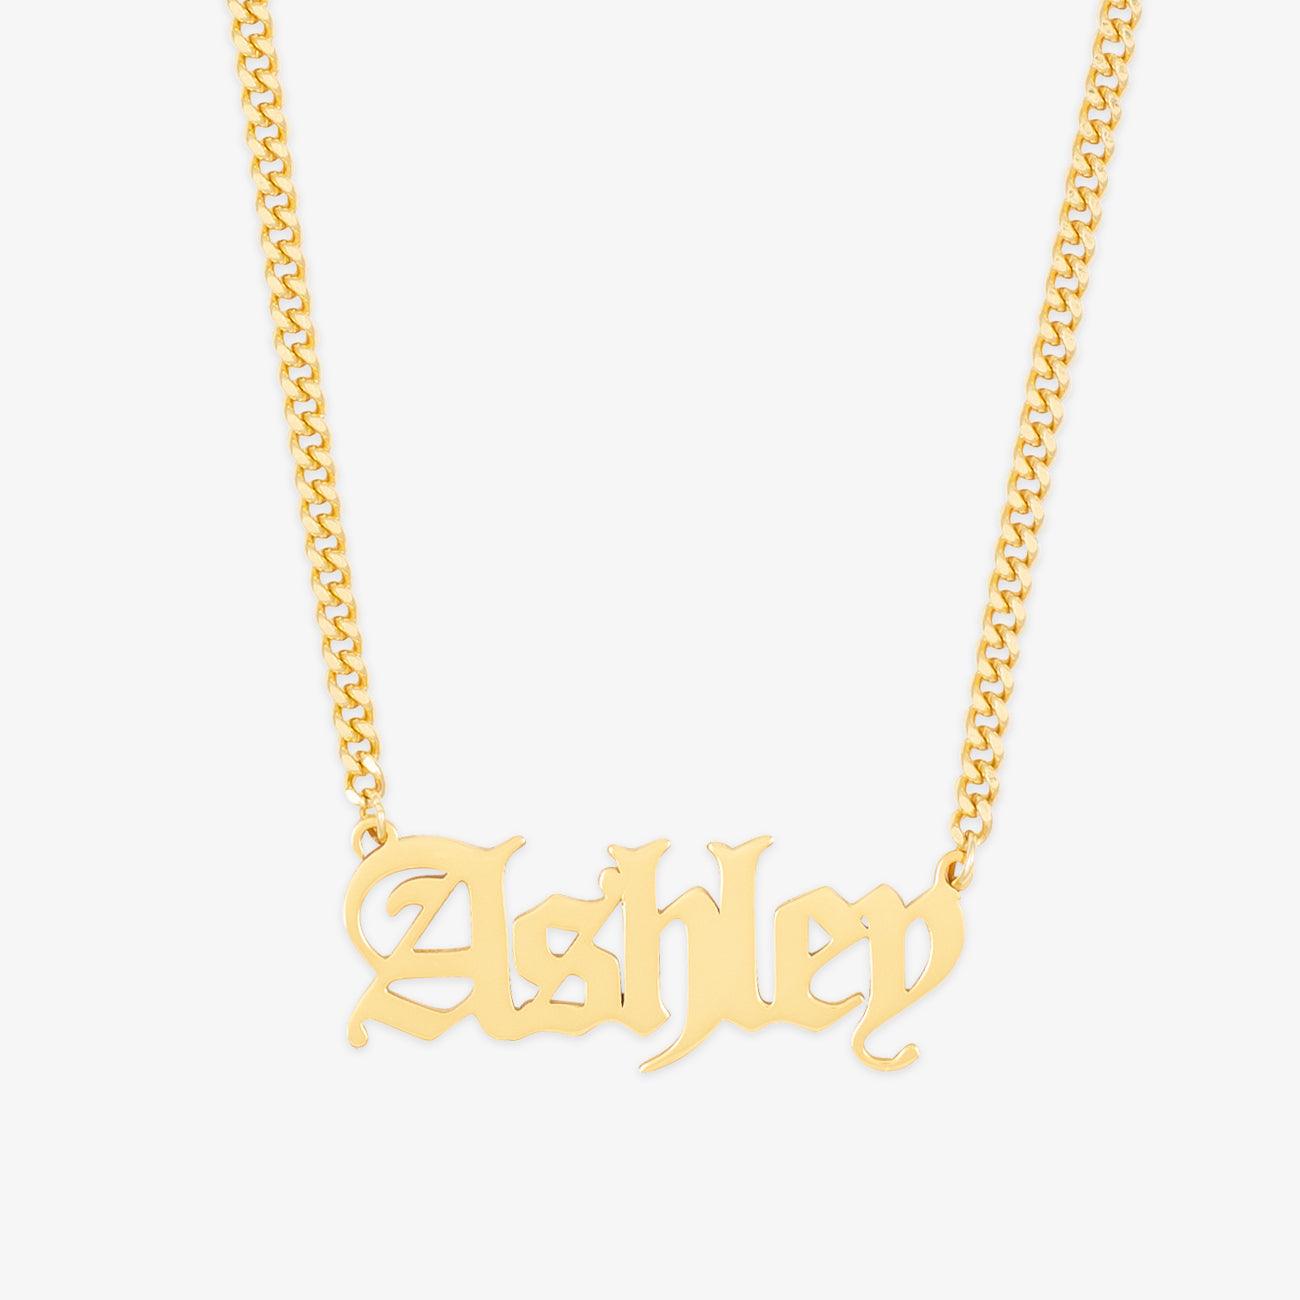 herzschmuck Thick Chain Gothic Name Necklace